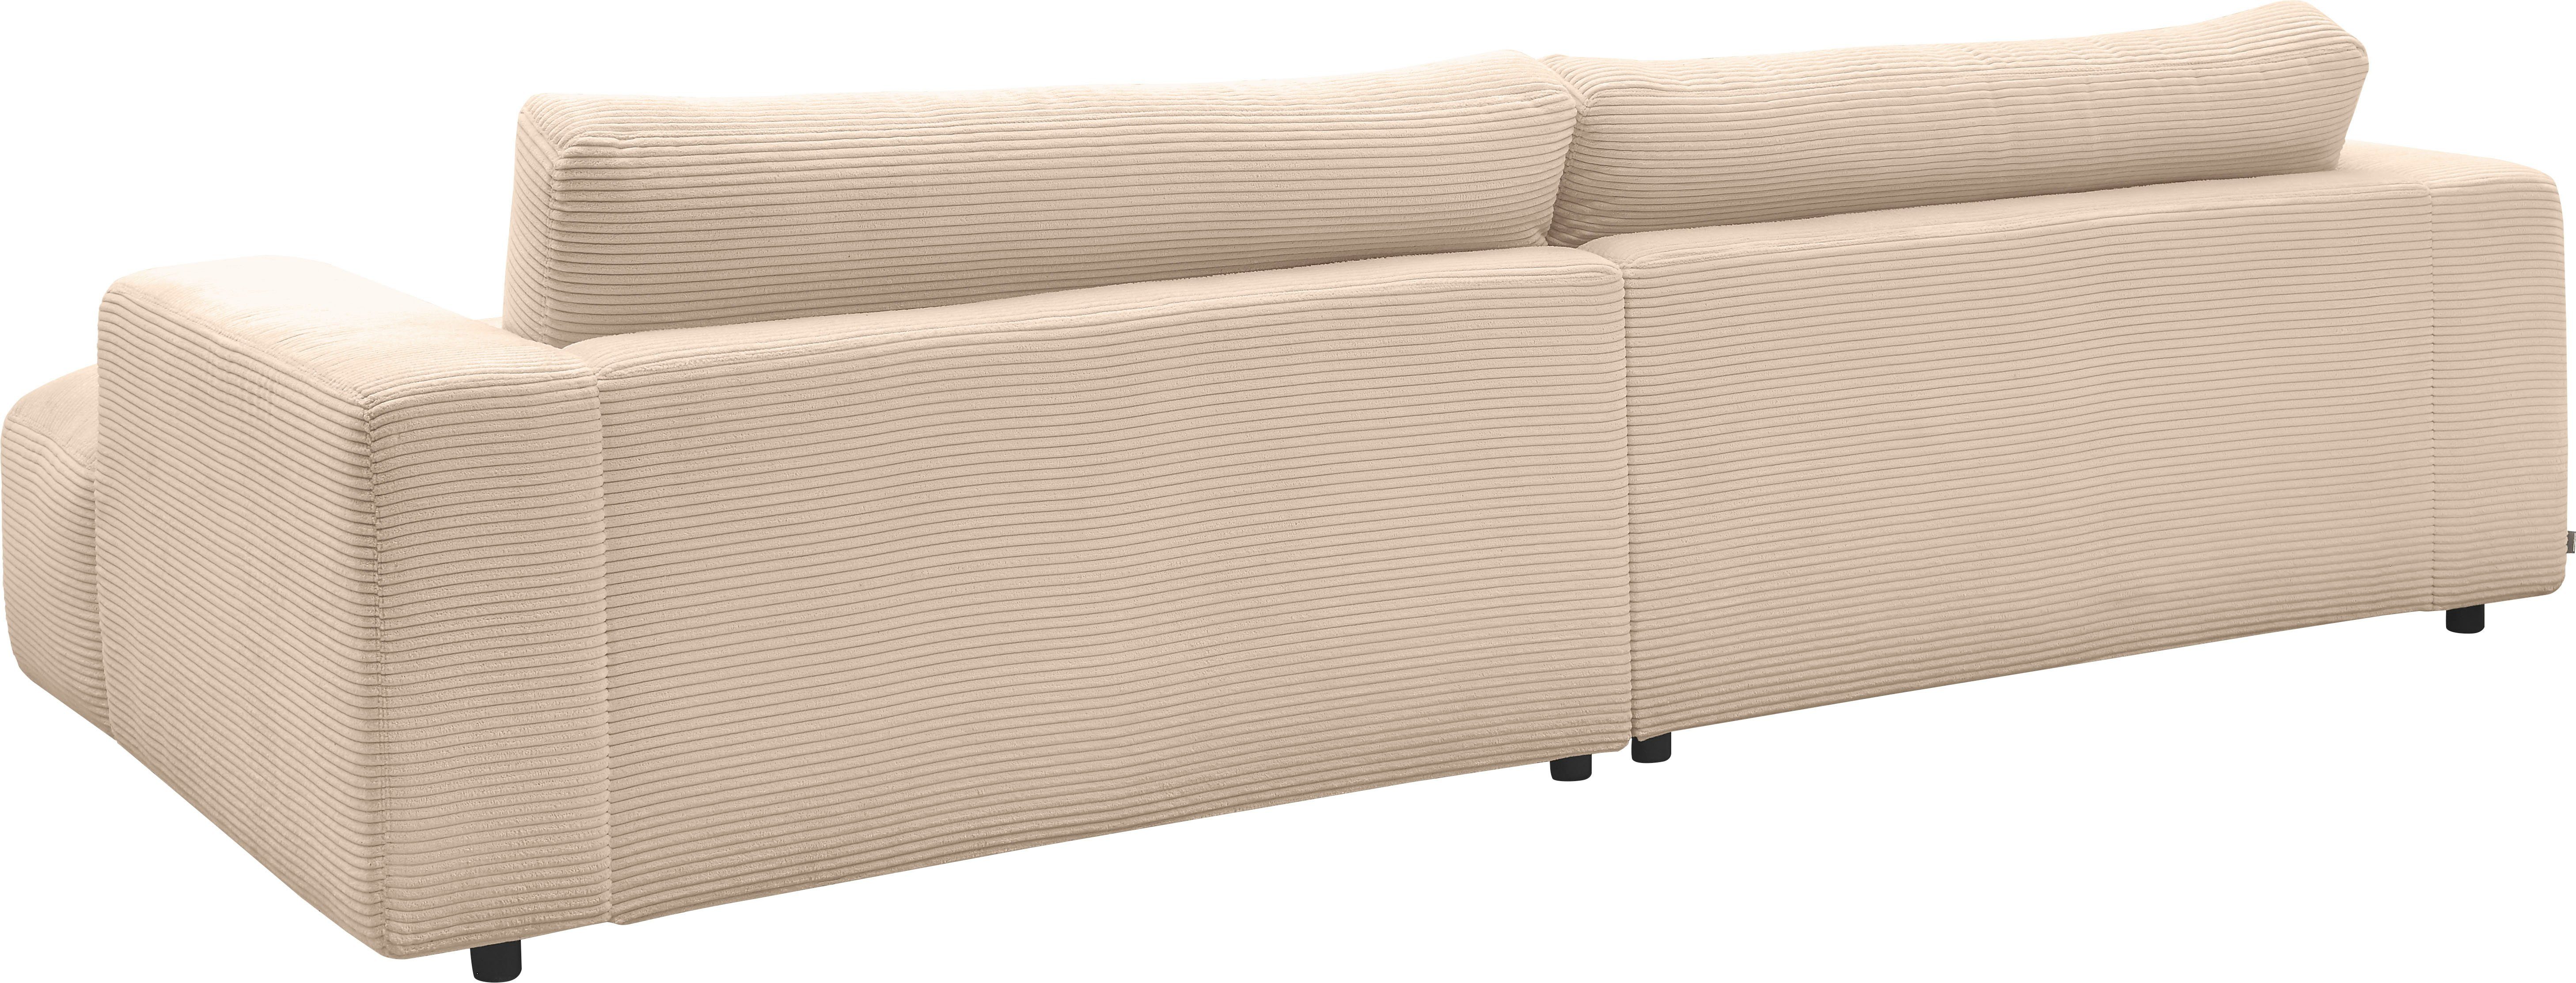 GALLERY M branded by Musterring Cord-Bezug, Lucia, 292 cm Breite Loungesofa nature